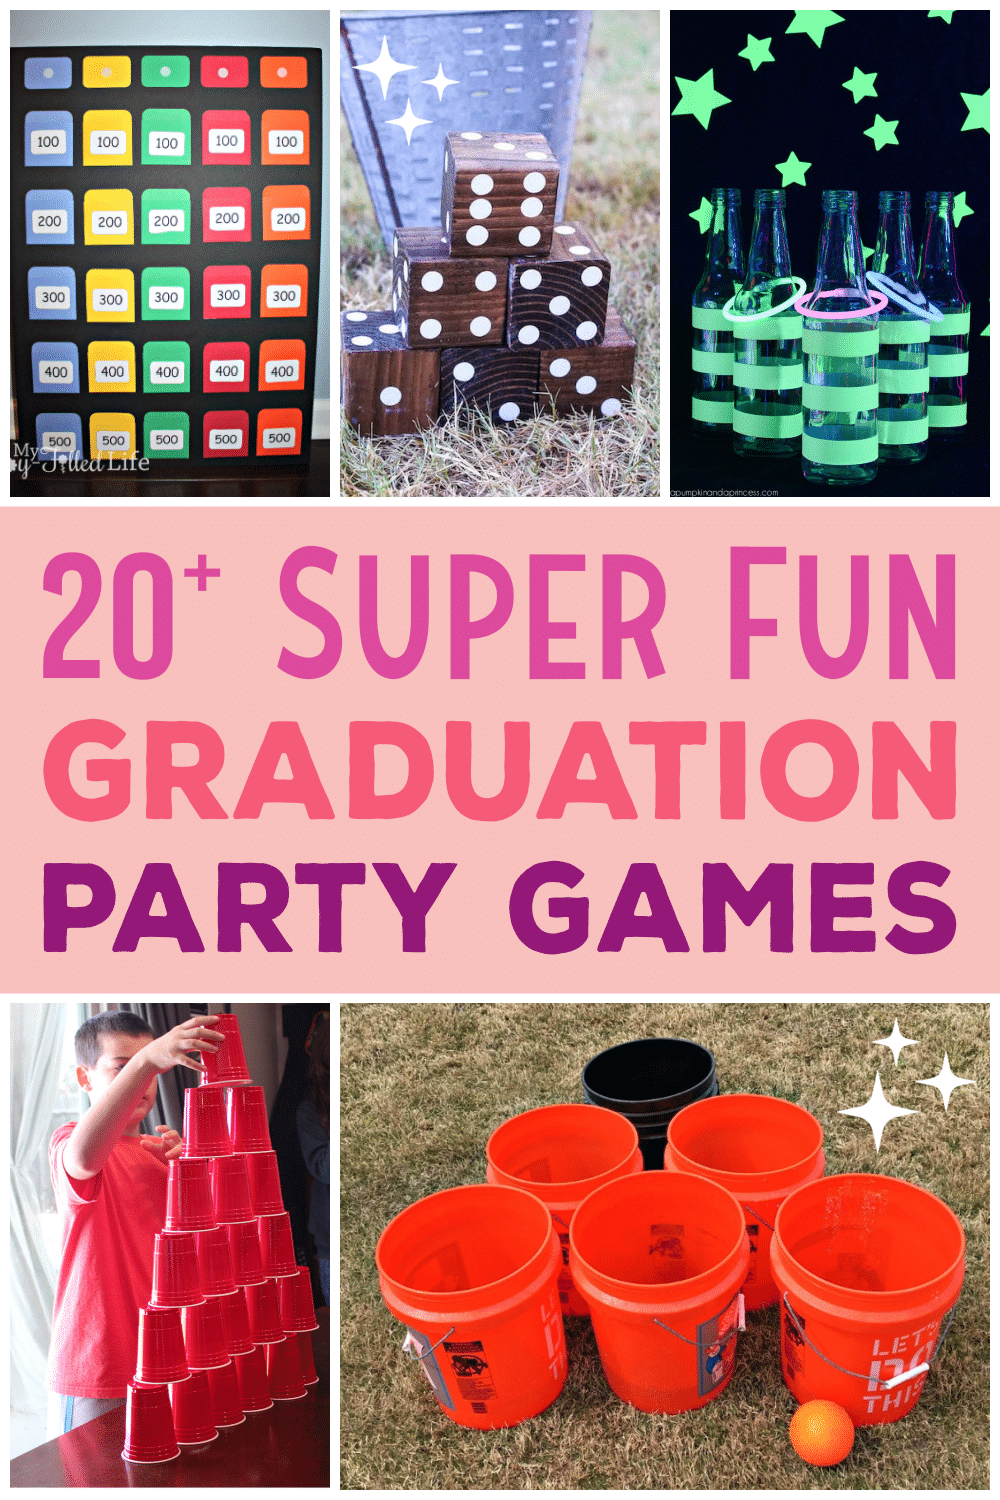 Collage graphic of party games with text "20+ Super Fun Graduation Party Games"